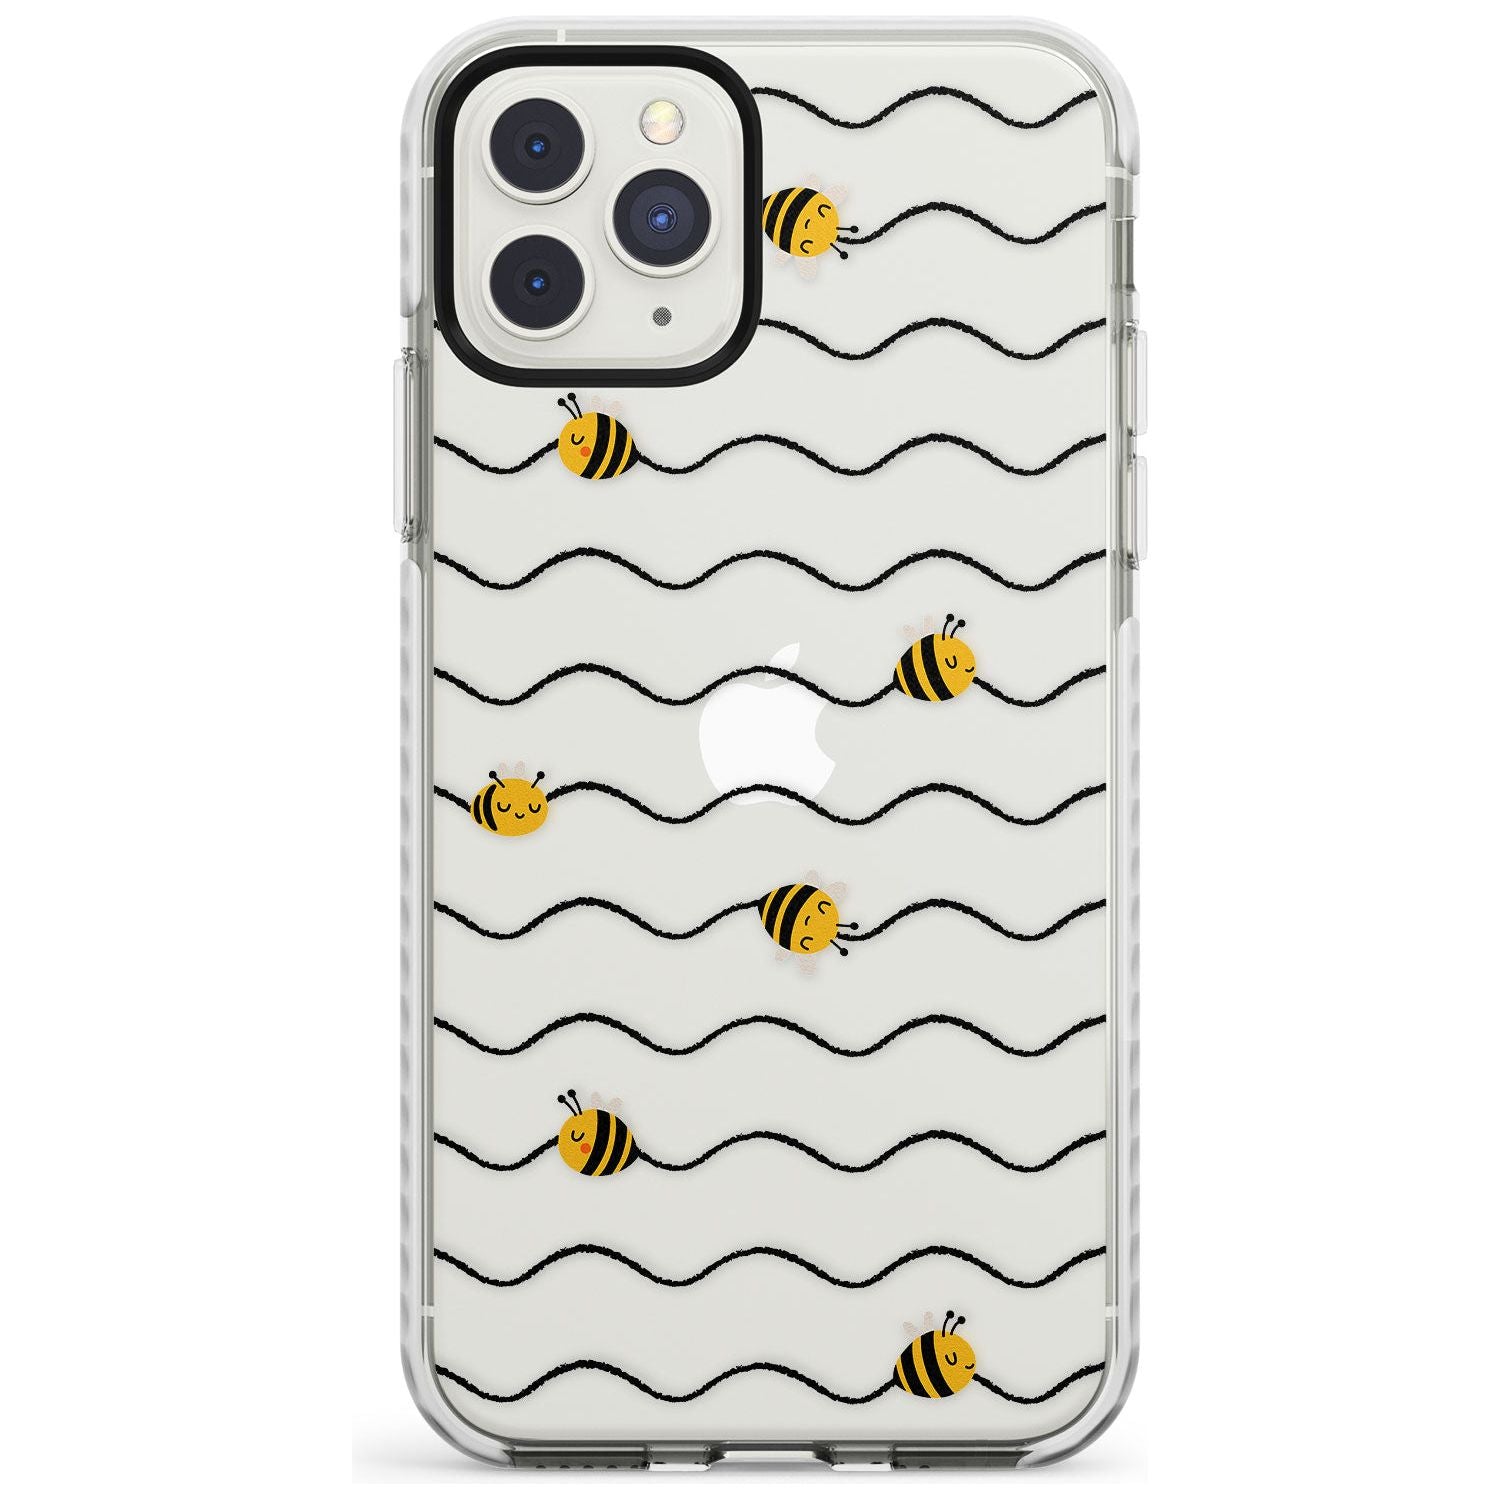 Sweet as Honey Patterns: Bees & Stripes (Clear) Impact Phone Case for iPhone 11 Pro Max